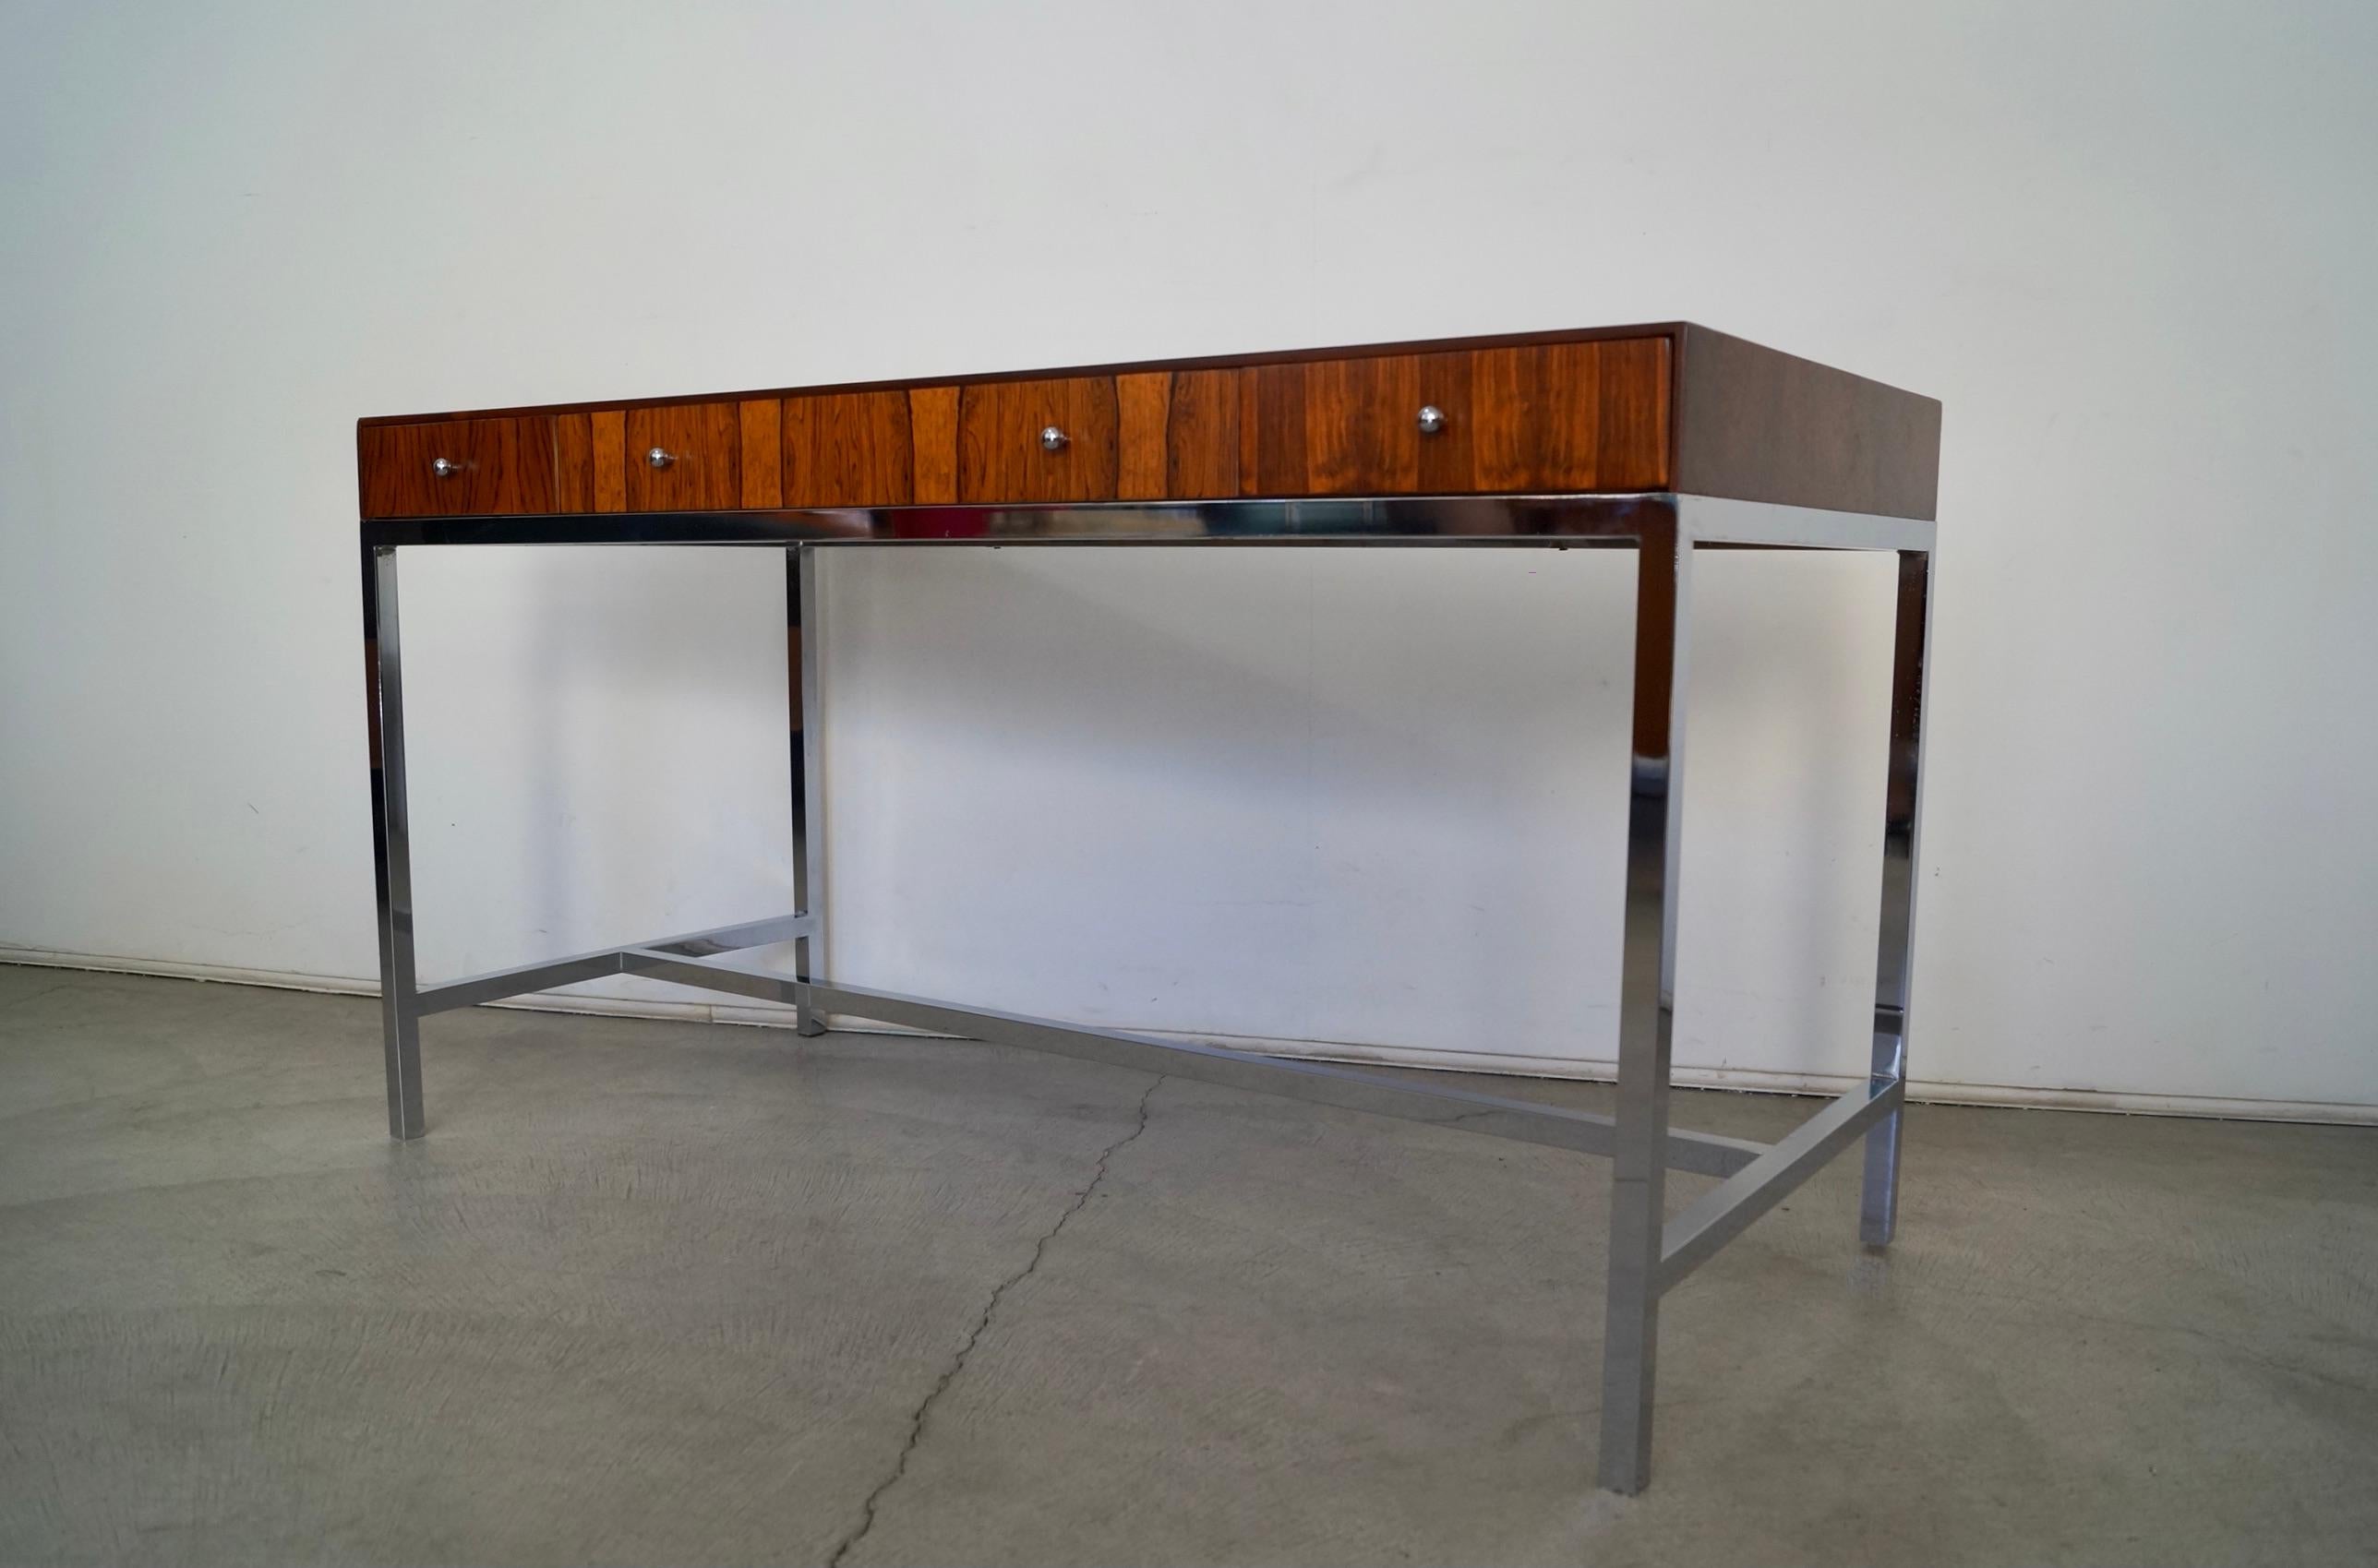 1960's Danish Modern Rosewood Desk In Excellent Condition For Sale In Burbank, CA